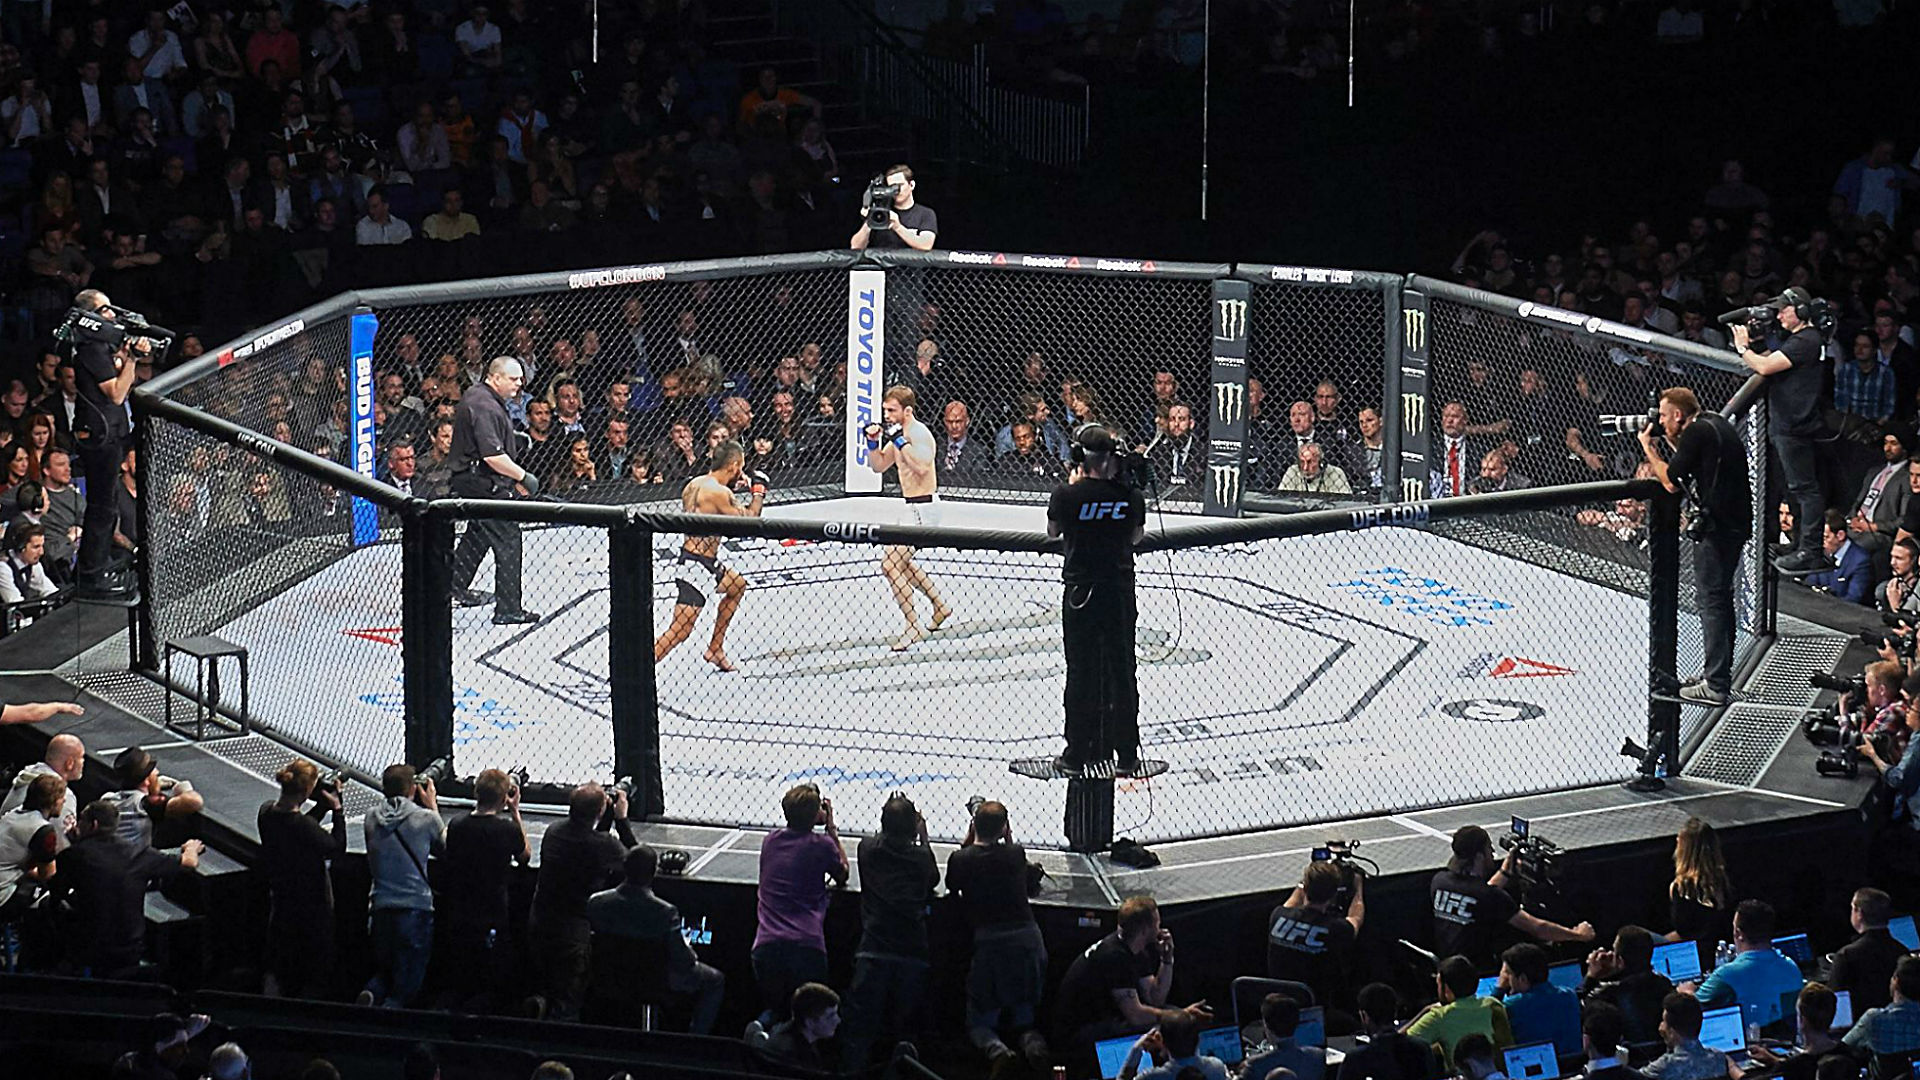 MMA event held at D&N Event Center